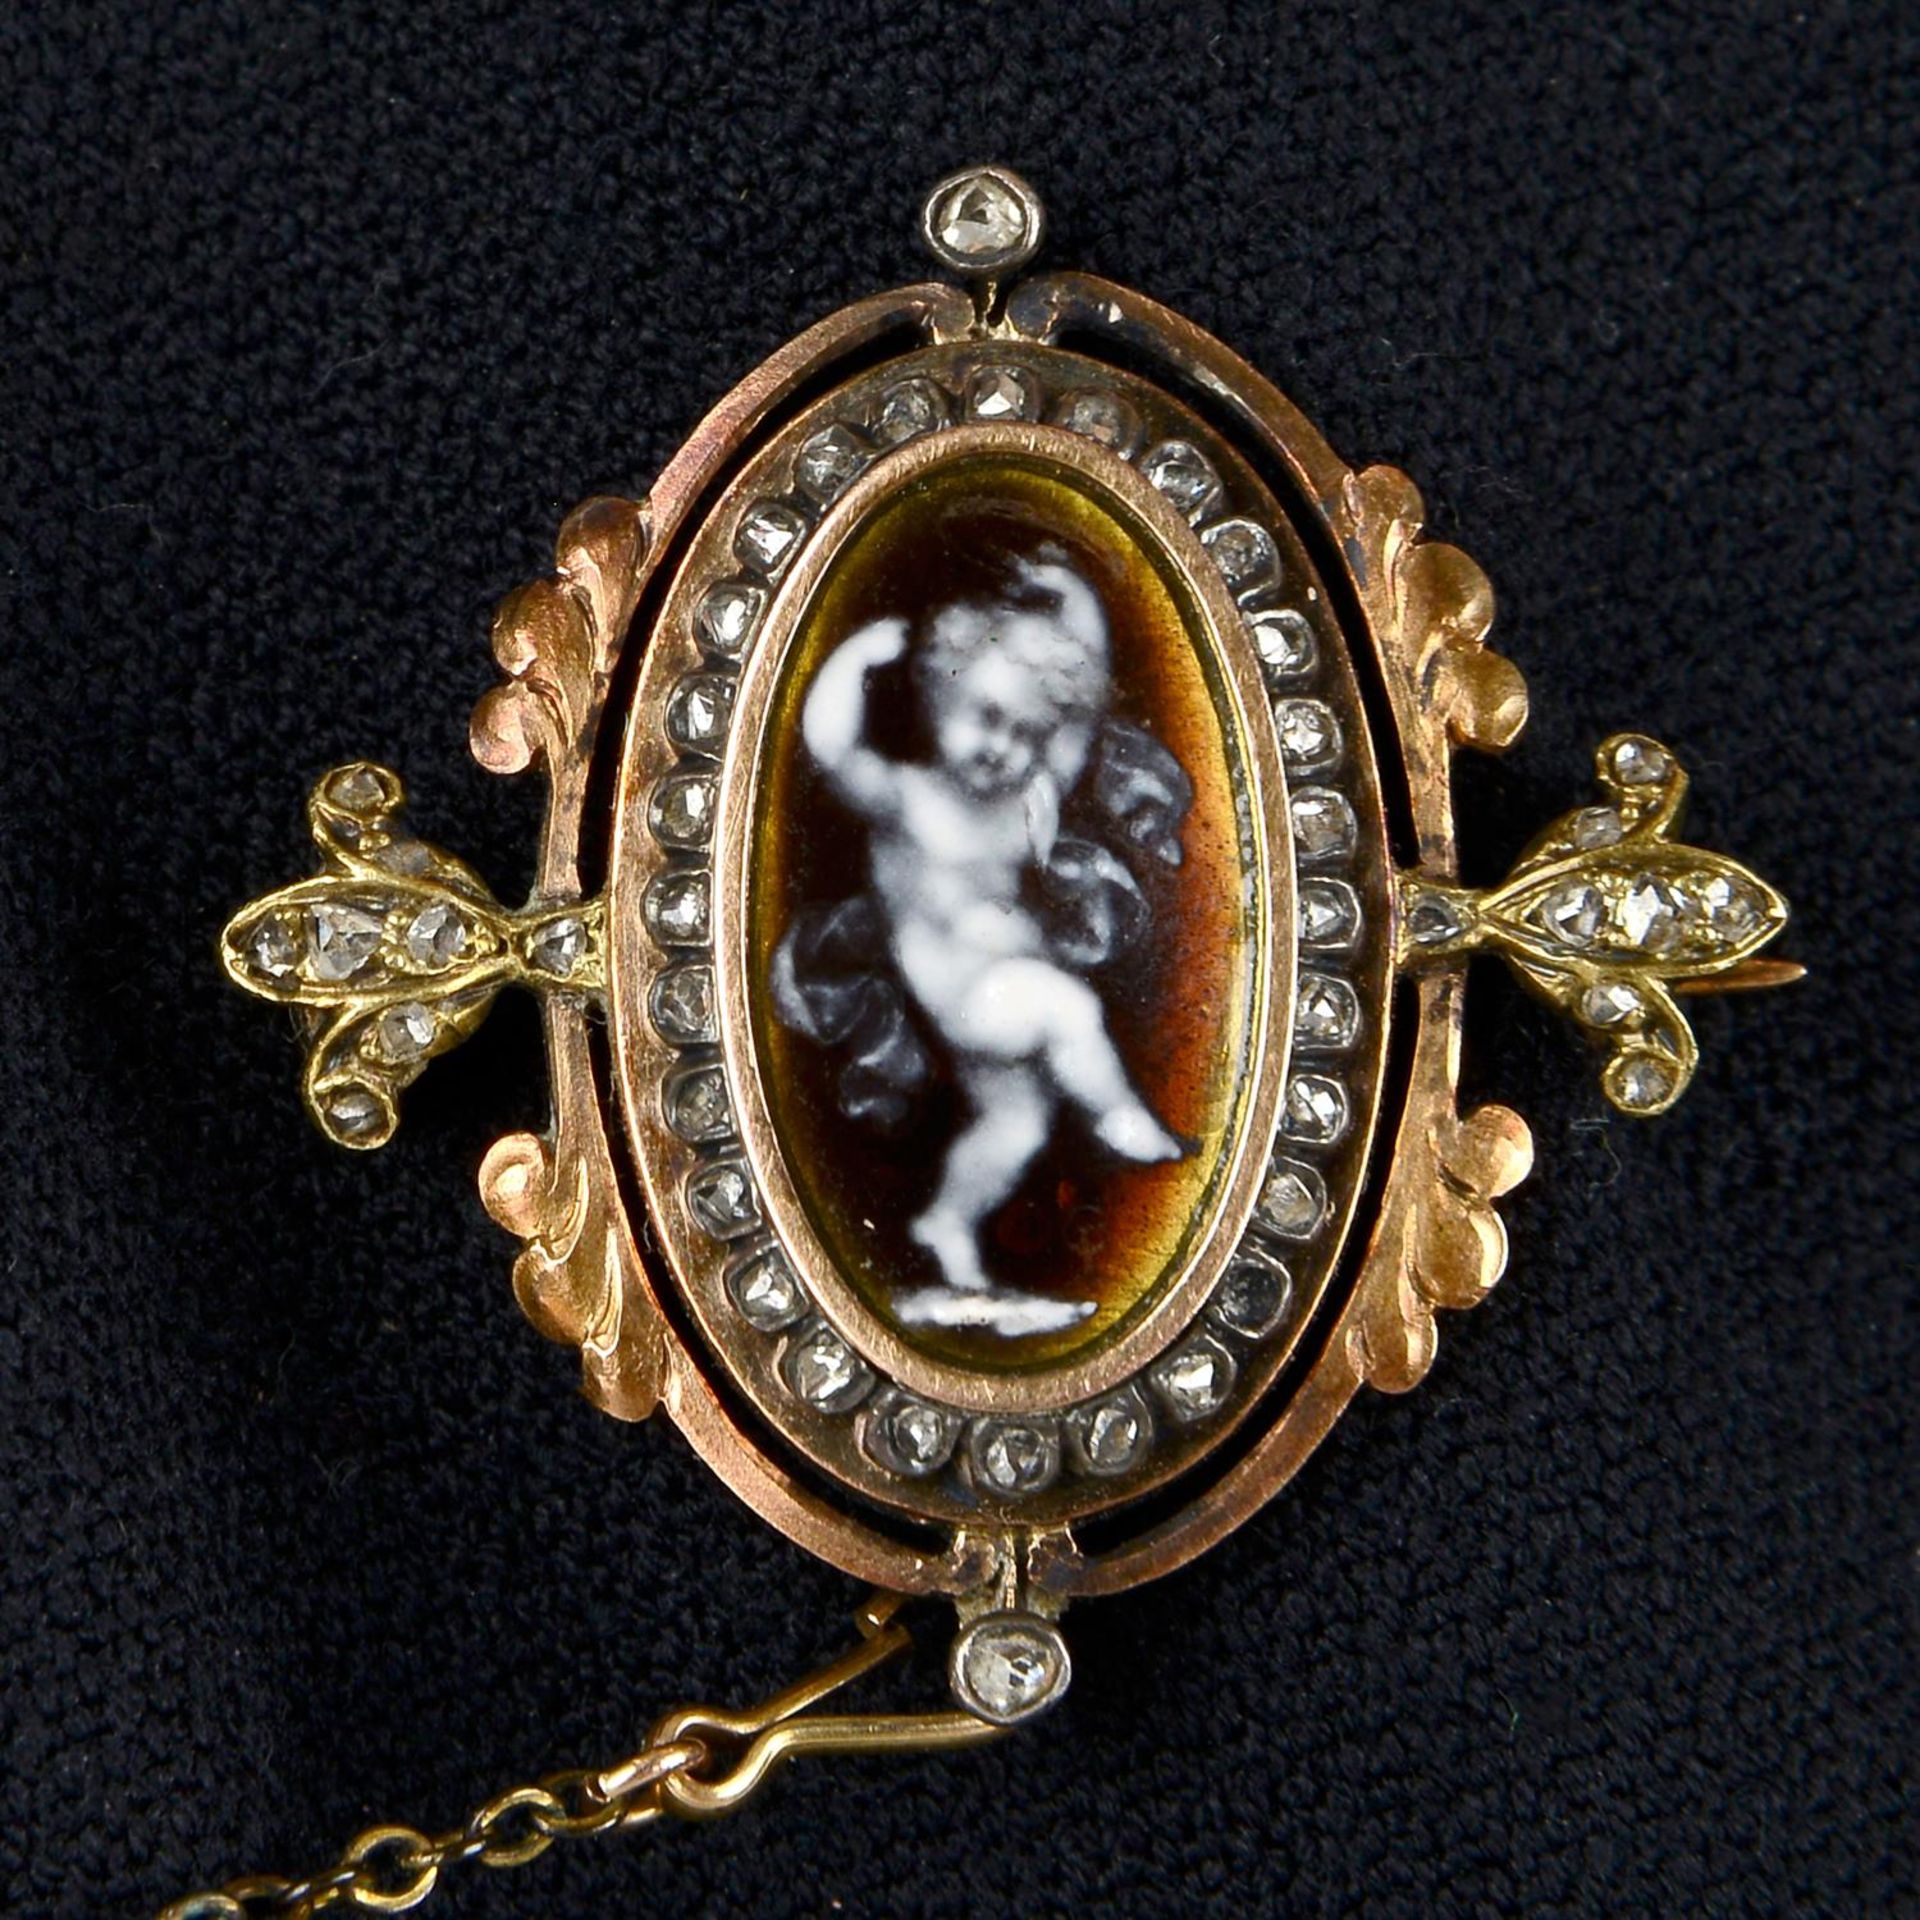 Late 19th c. gold diamond and enamel brooch